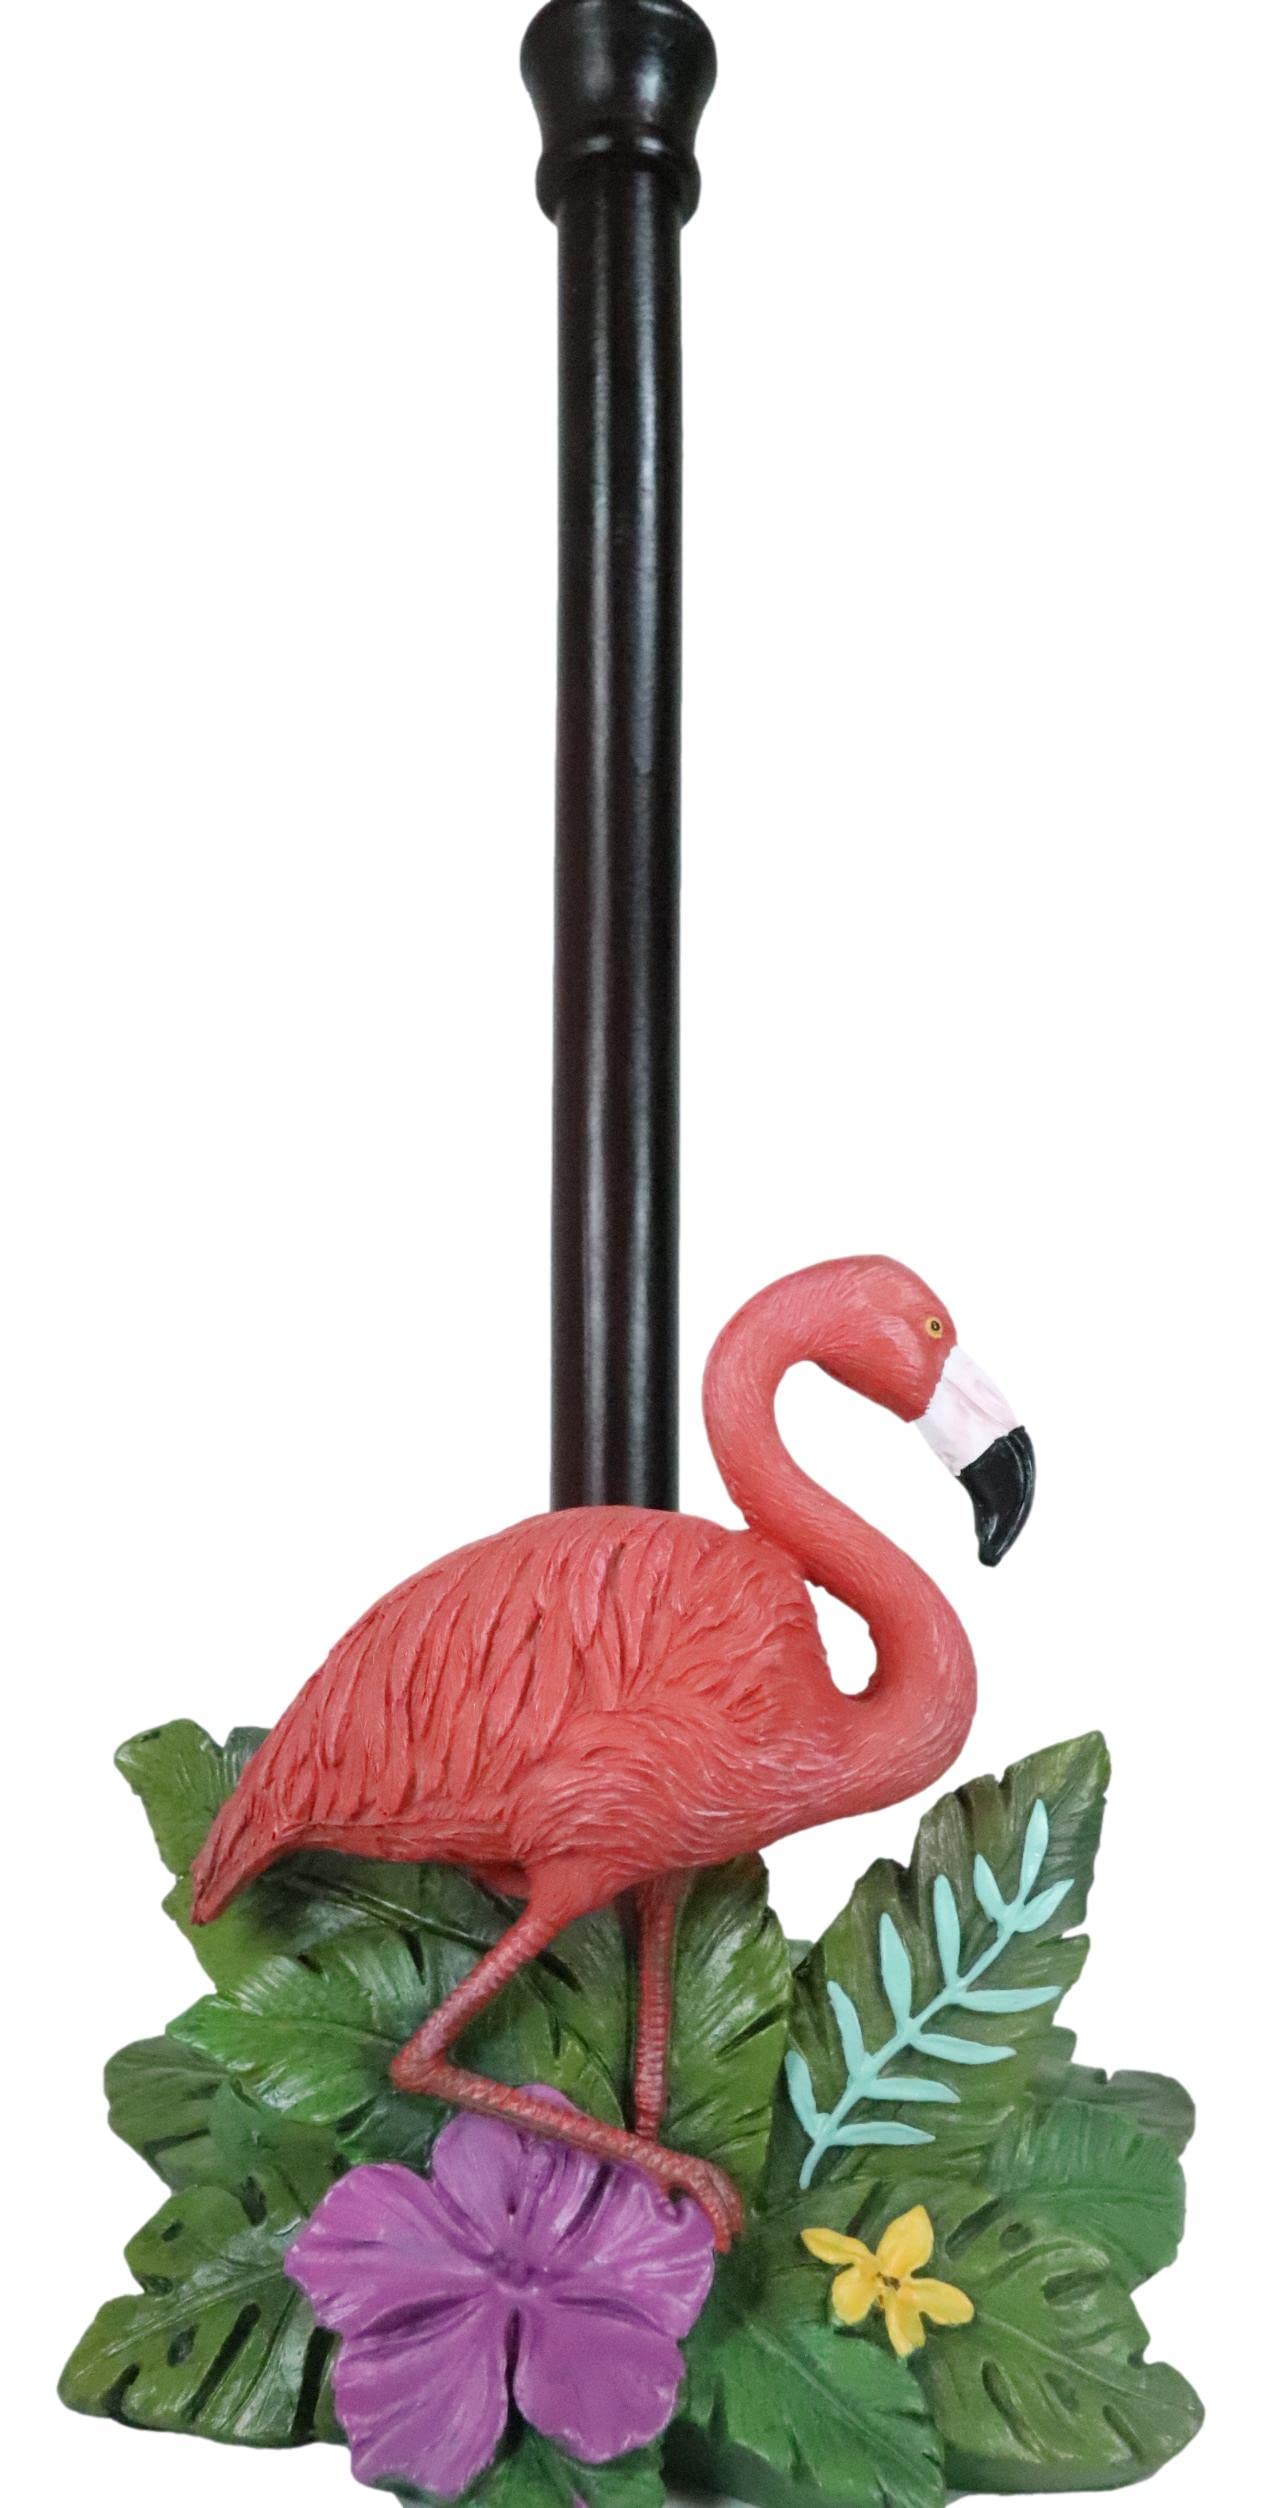 Ebros Gift Tropical Birds of Paradise Graceful Pink Flamingo Kitchen Dining Paper Towel Holder Dispenser 15" High Home Accent Western Decorative Figurine Dinner Table or Bar or Countertop Centerpiece